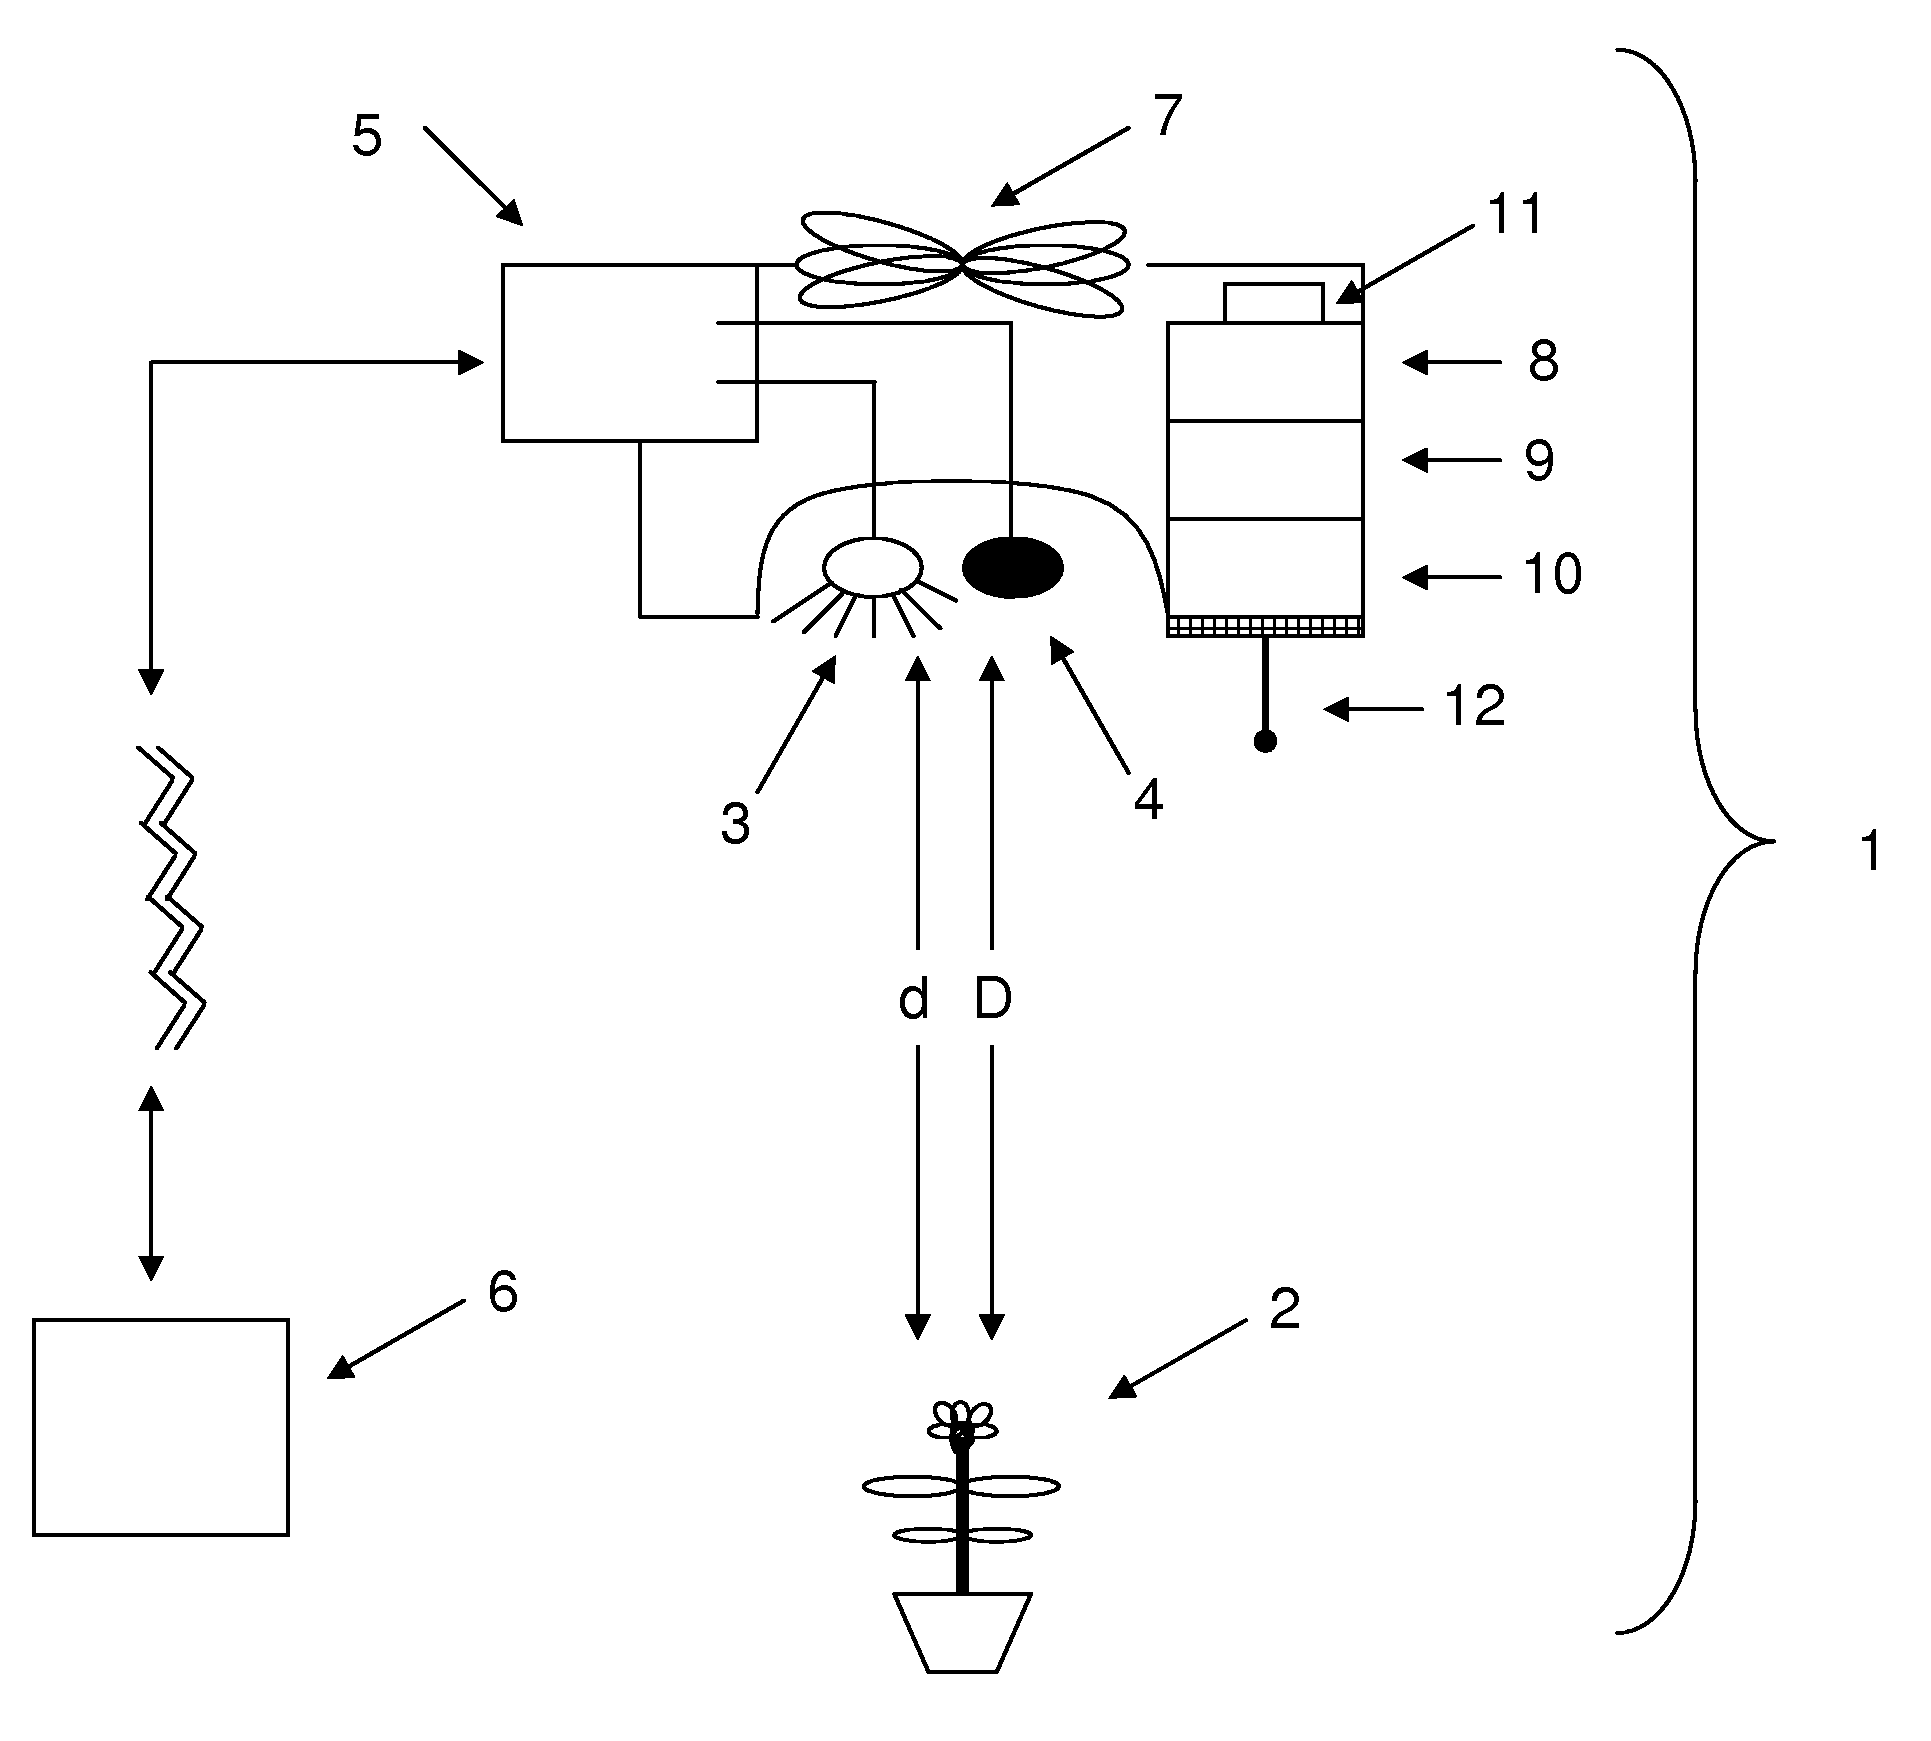 System for modulating plant growth or attributes